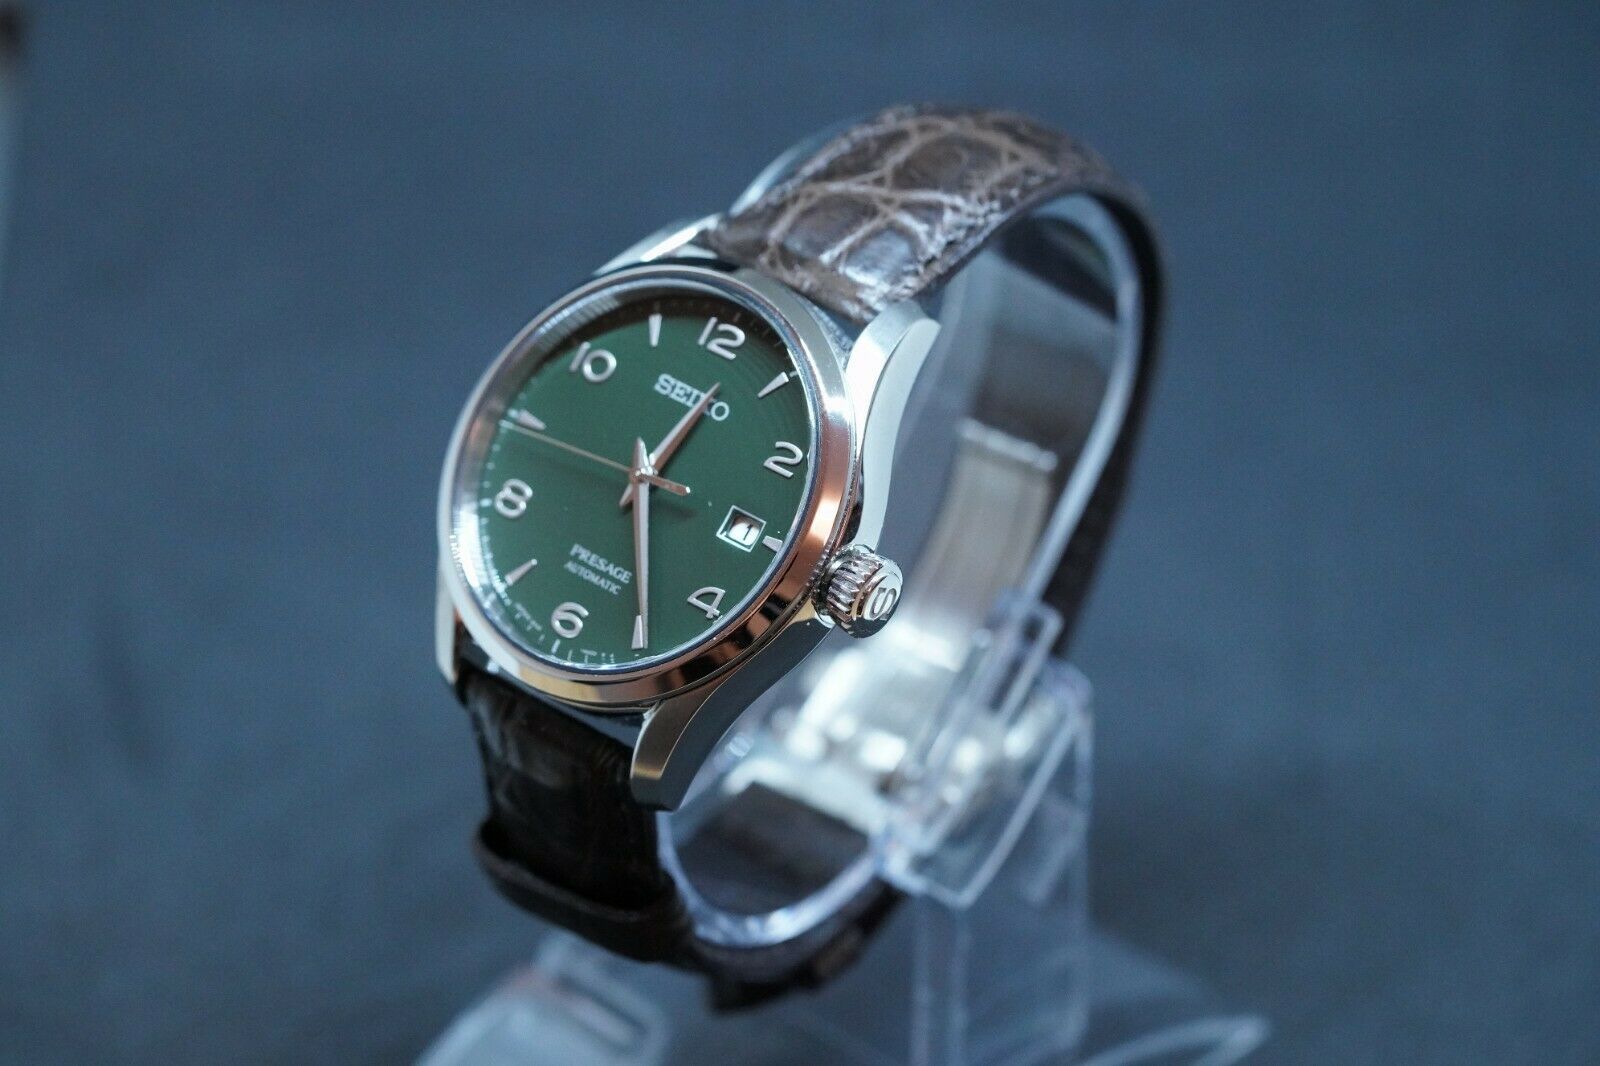 Seiko Presage Green Enamel Dial Leather Strap Limited Edition Watch SPB111  Used | WatchCharts